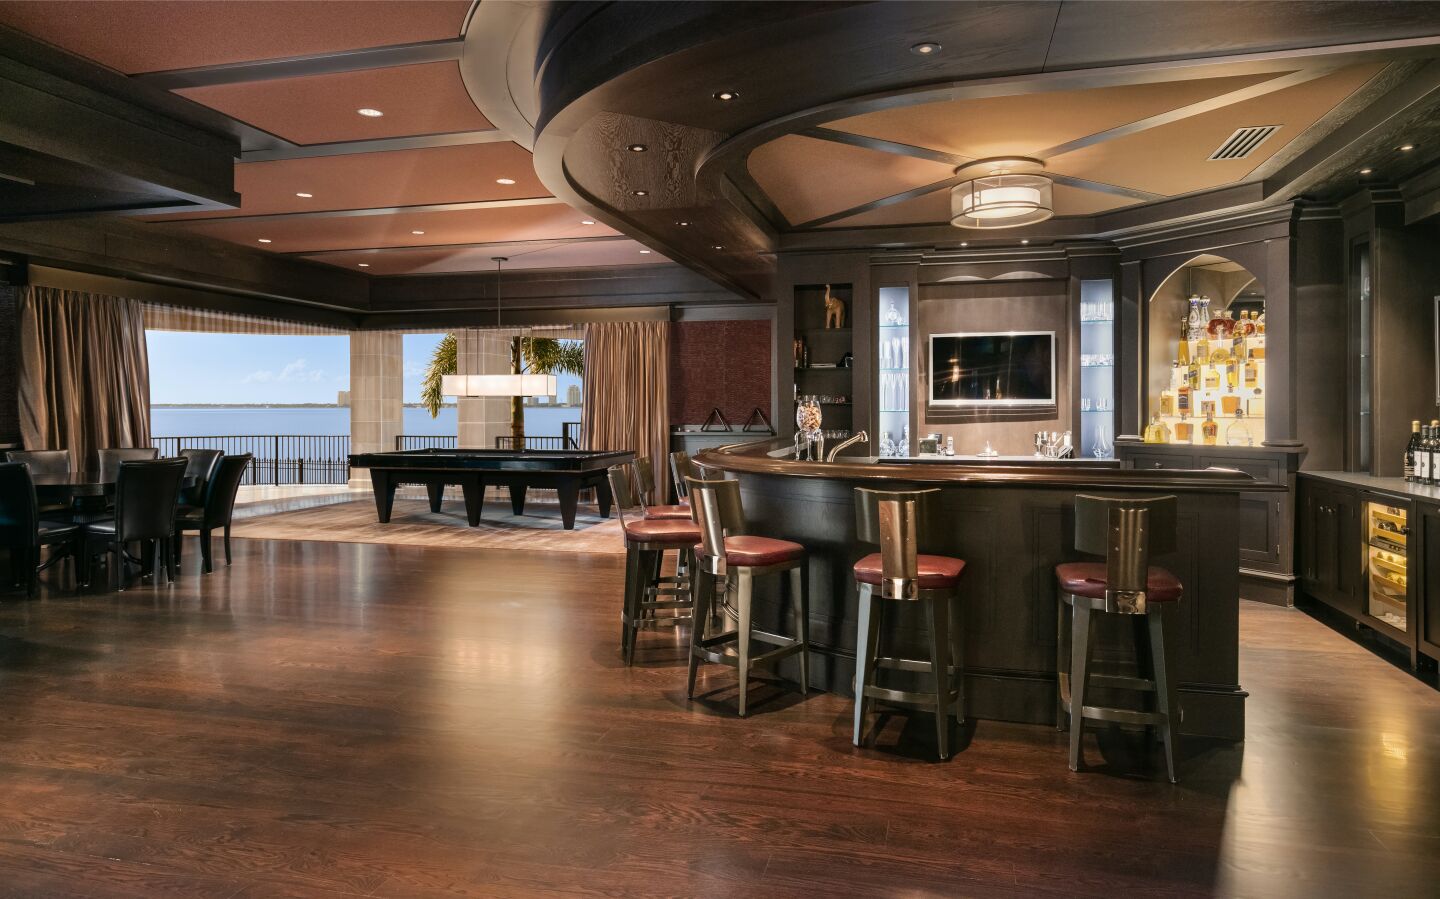 The bar has stools, dark colors and an expanse of wood floor.